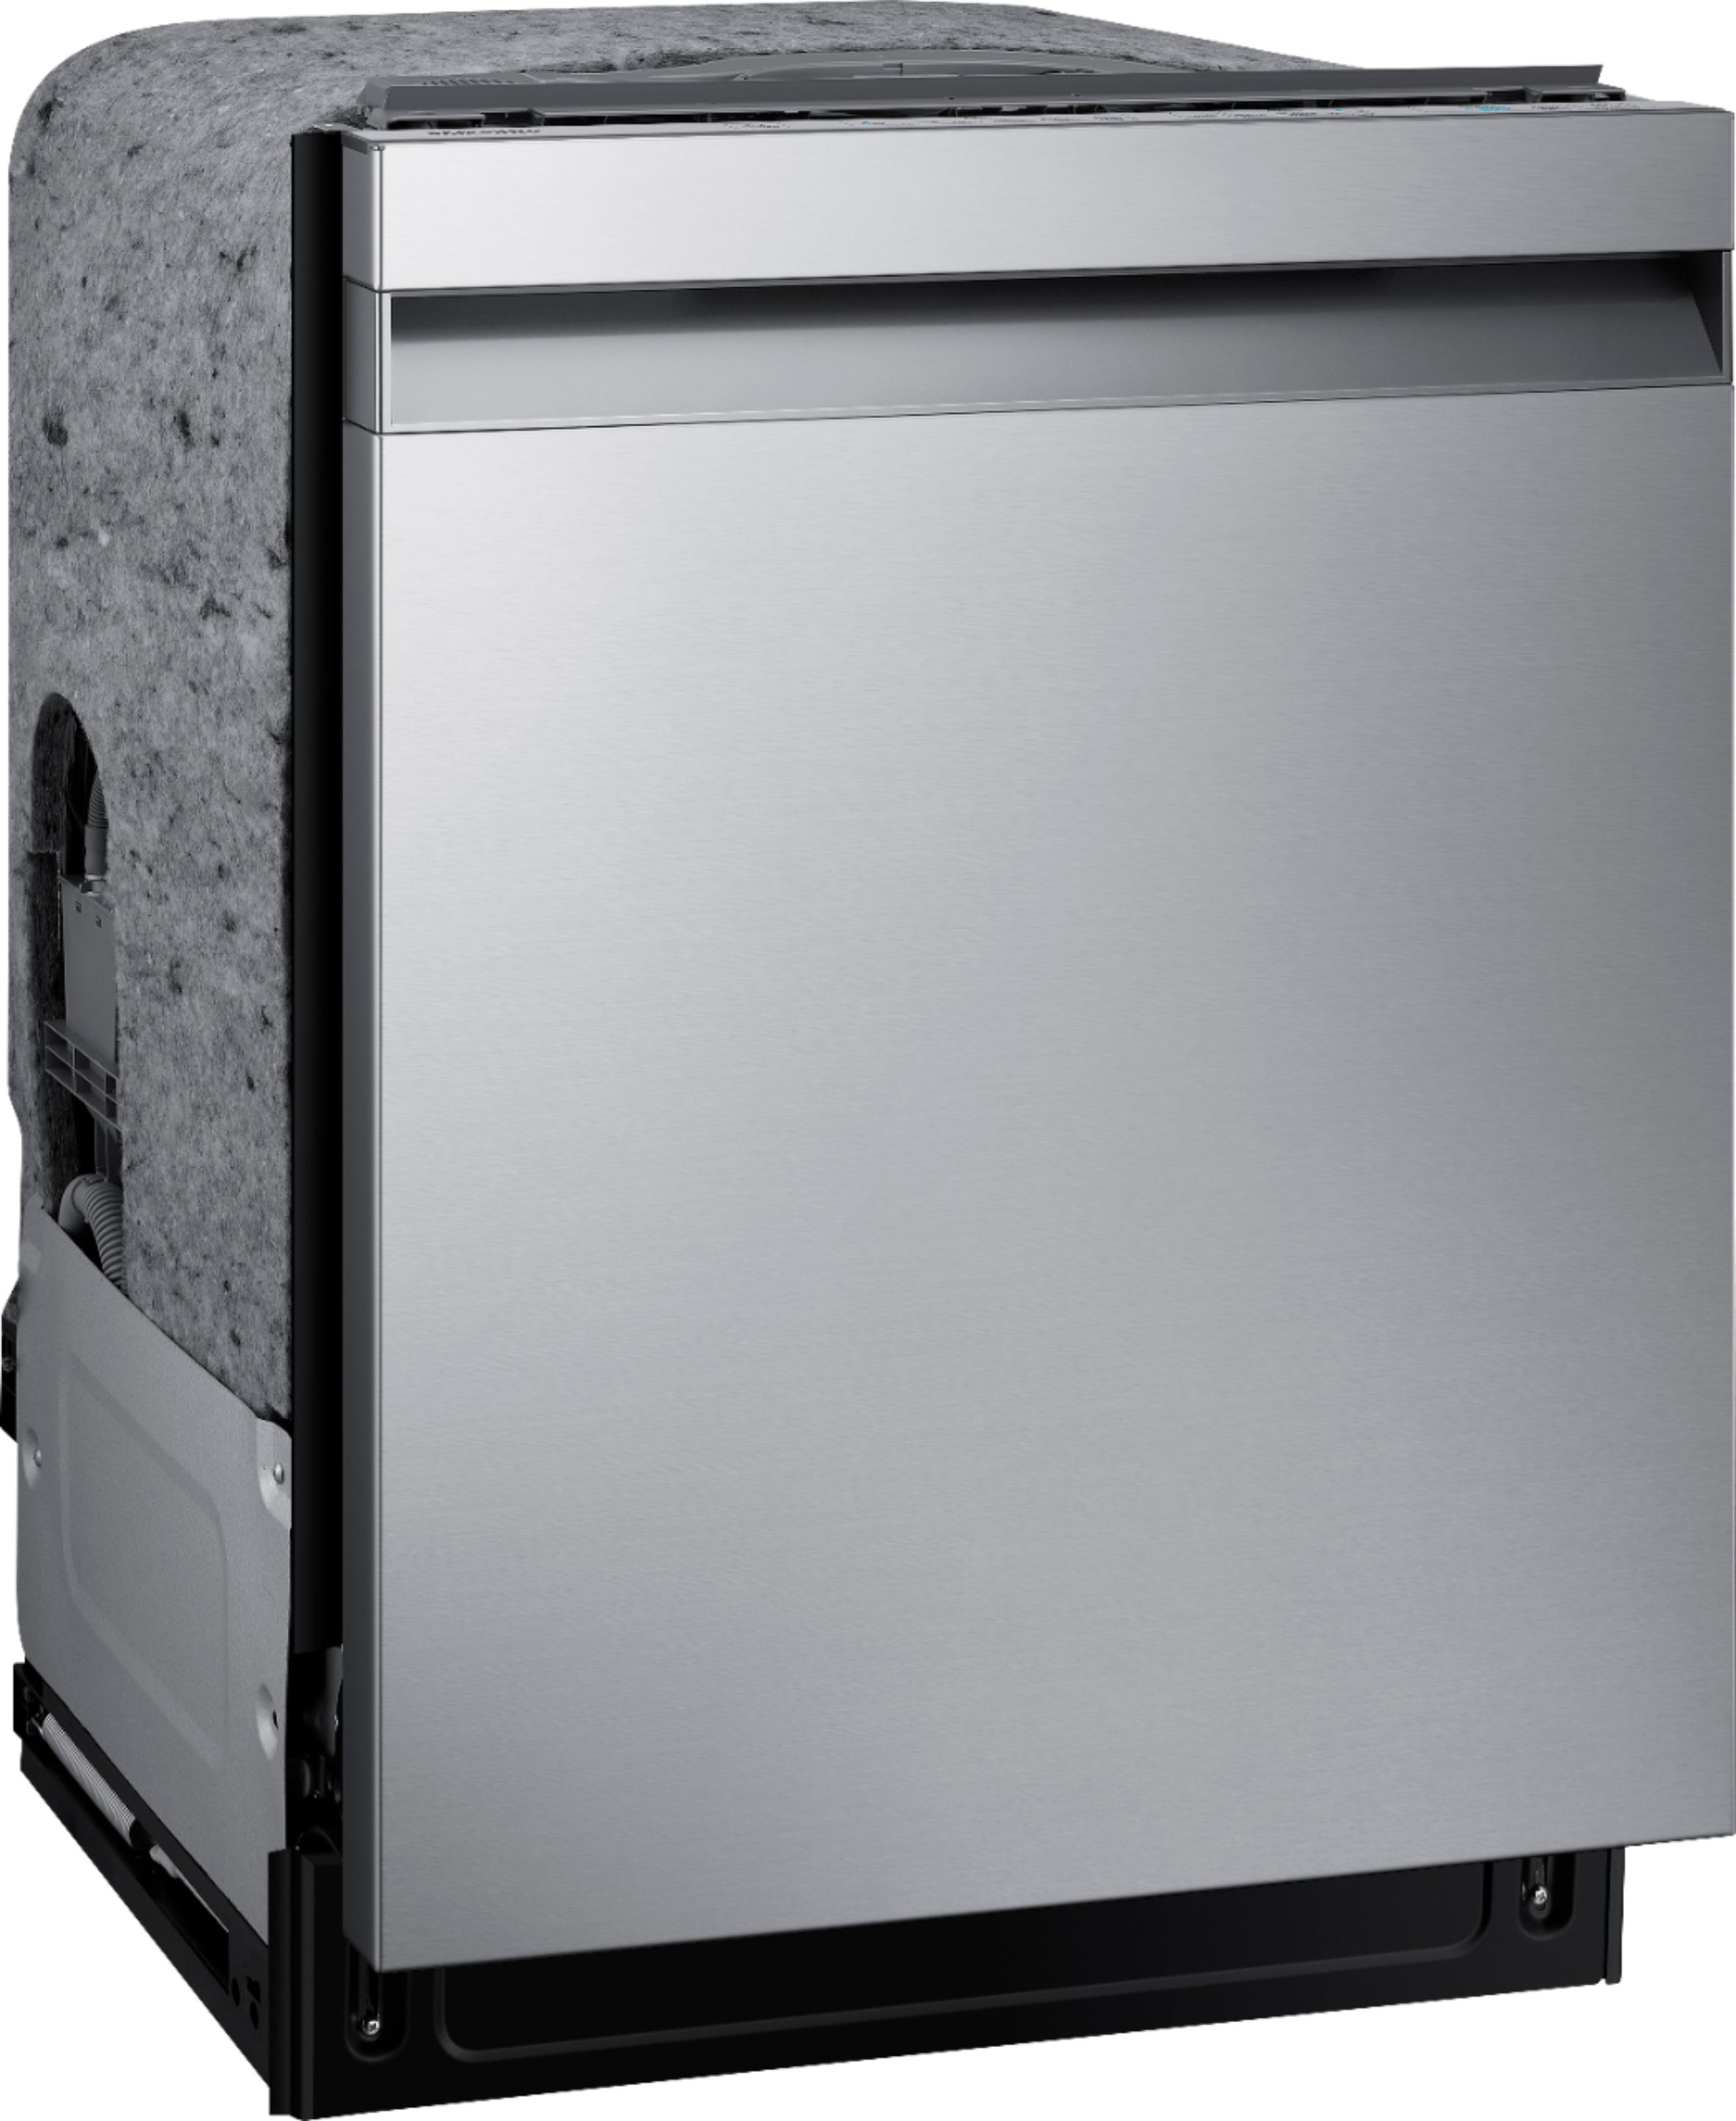 Angle View: Samsung - StormWash 24" Top Control Built-In Dishwasher with AutoRelease Dry, 3rd Rack, 42 dBA - Stainless steel